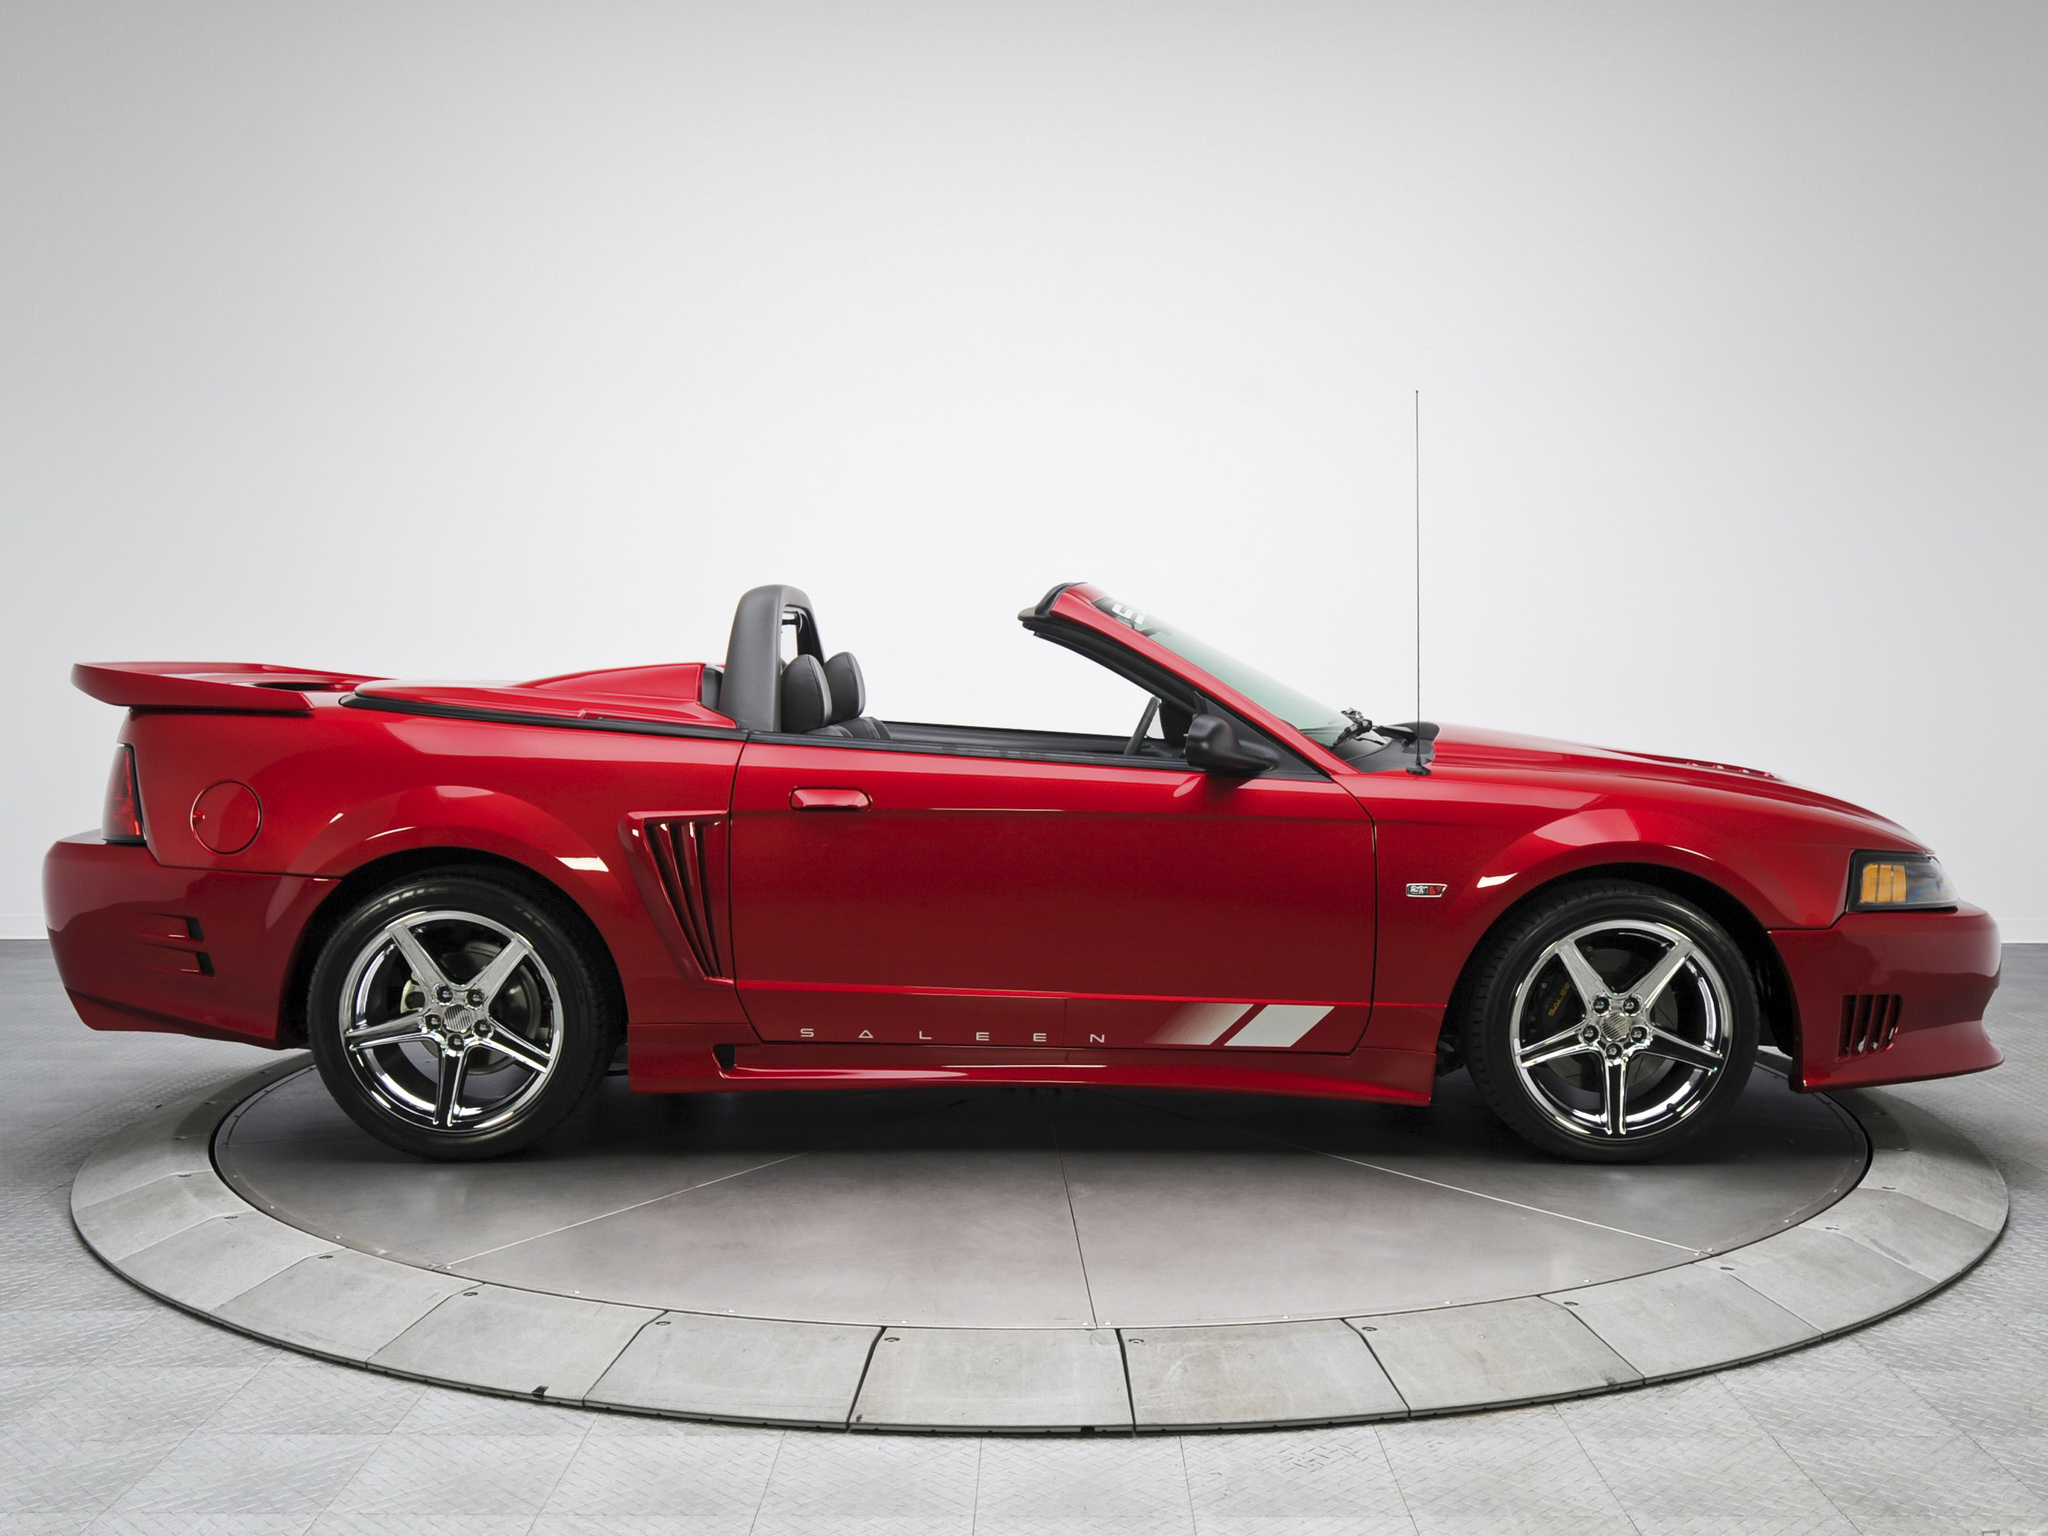 20, 02saleen, S281, Sc, Extreme, Convertible, Supercar, Supercars, Muscle, S c, Ford, Mustang Wallpaper